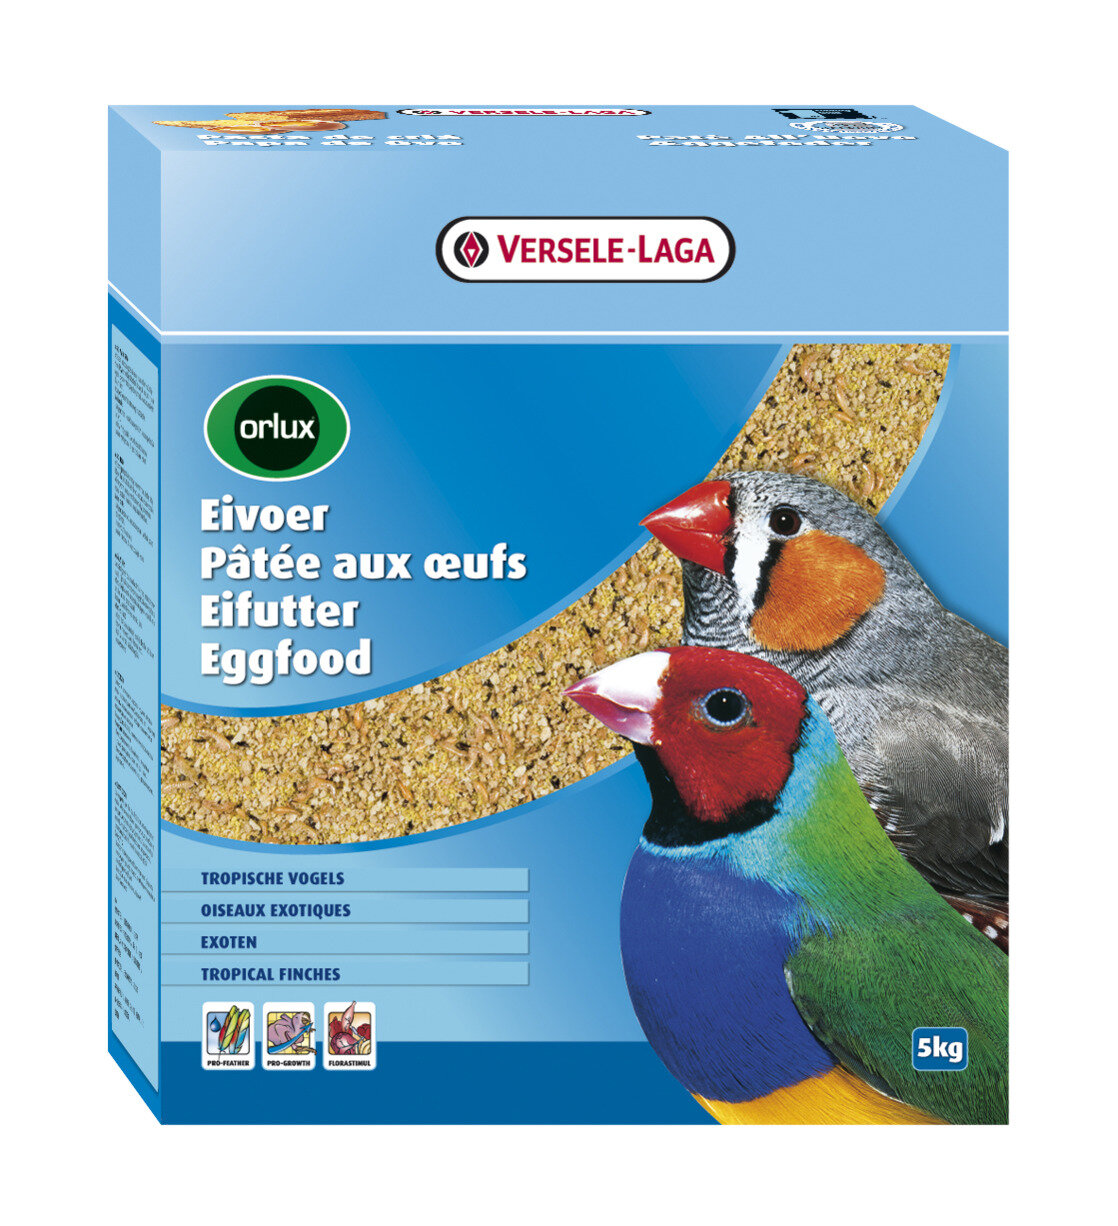 Versele Laga Orlux Dry Eggfood For Tropical Finches 5kg